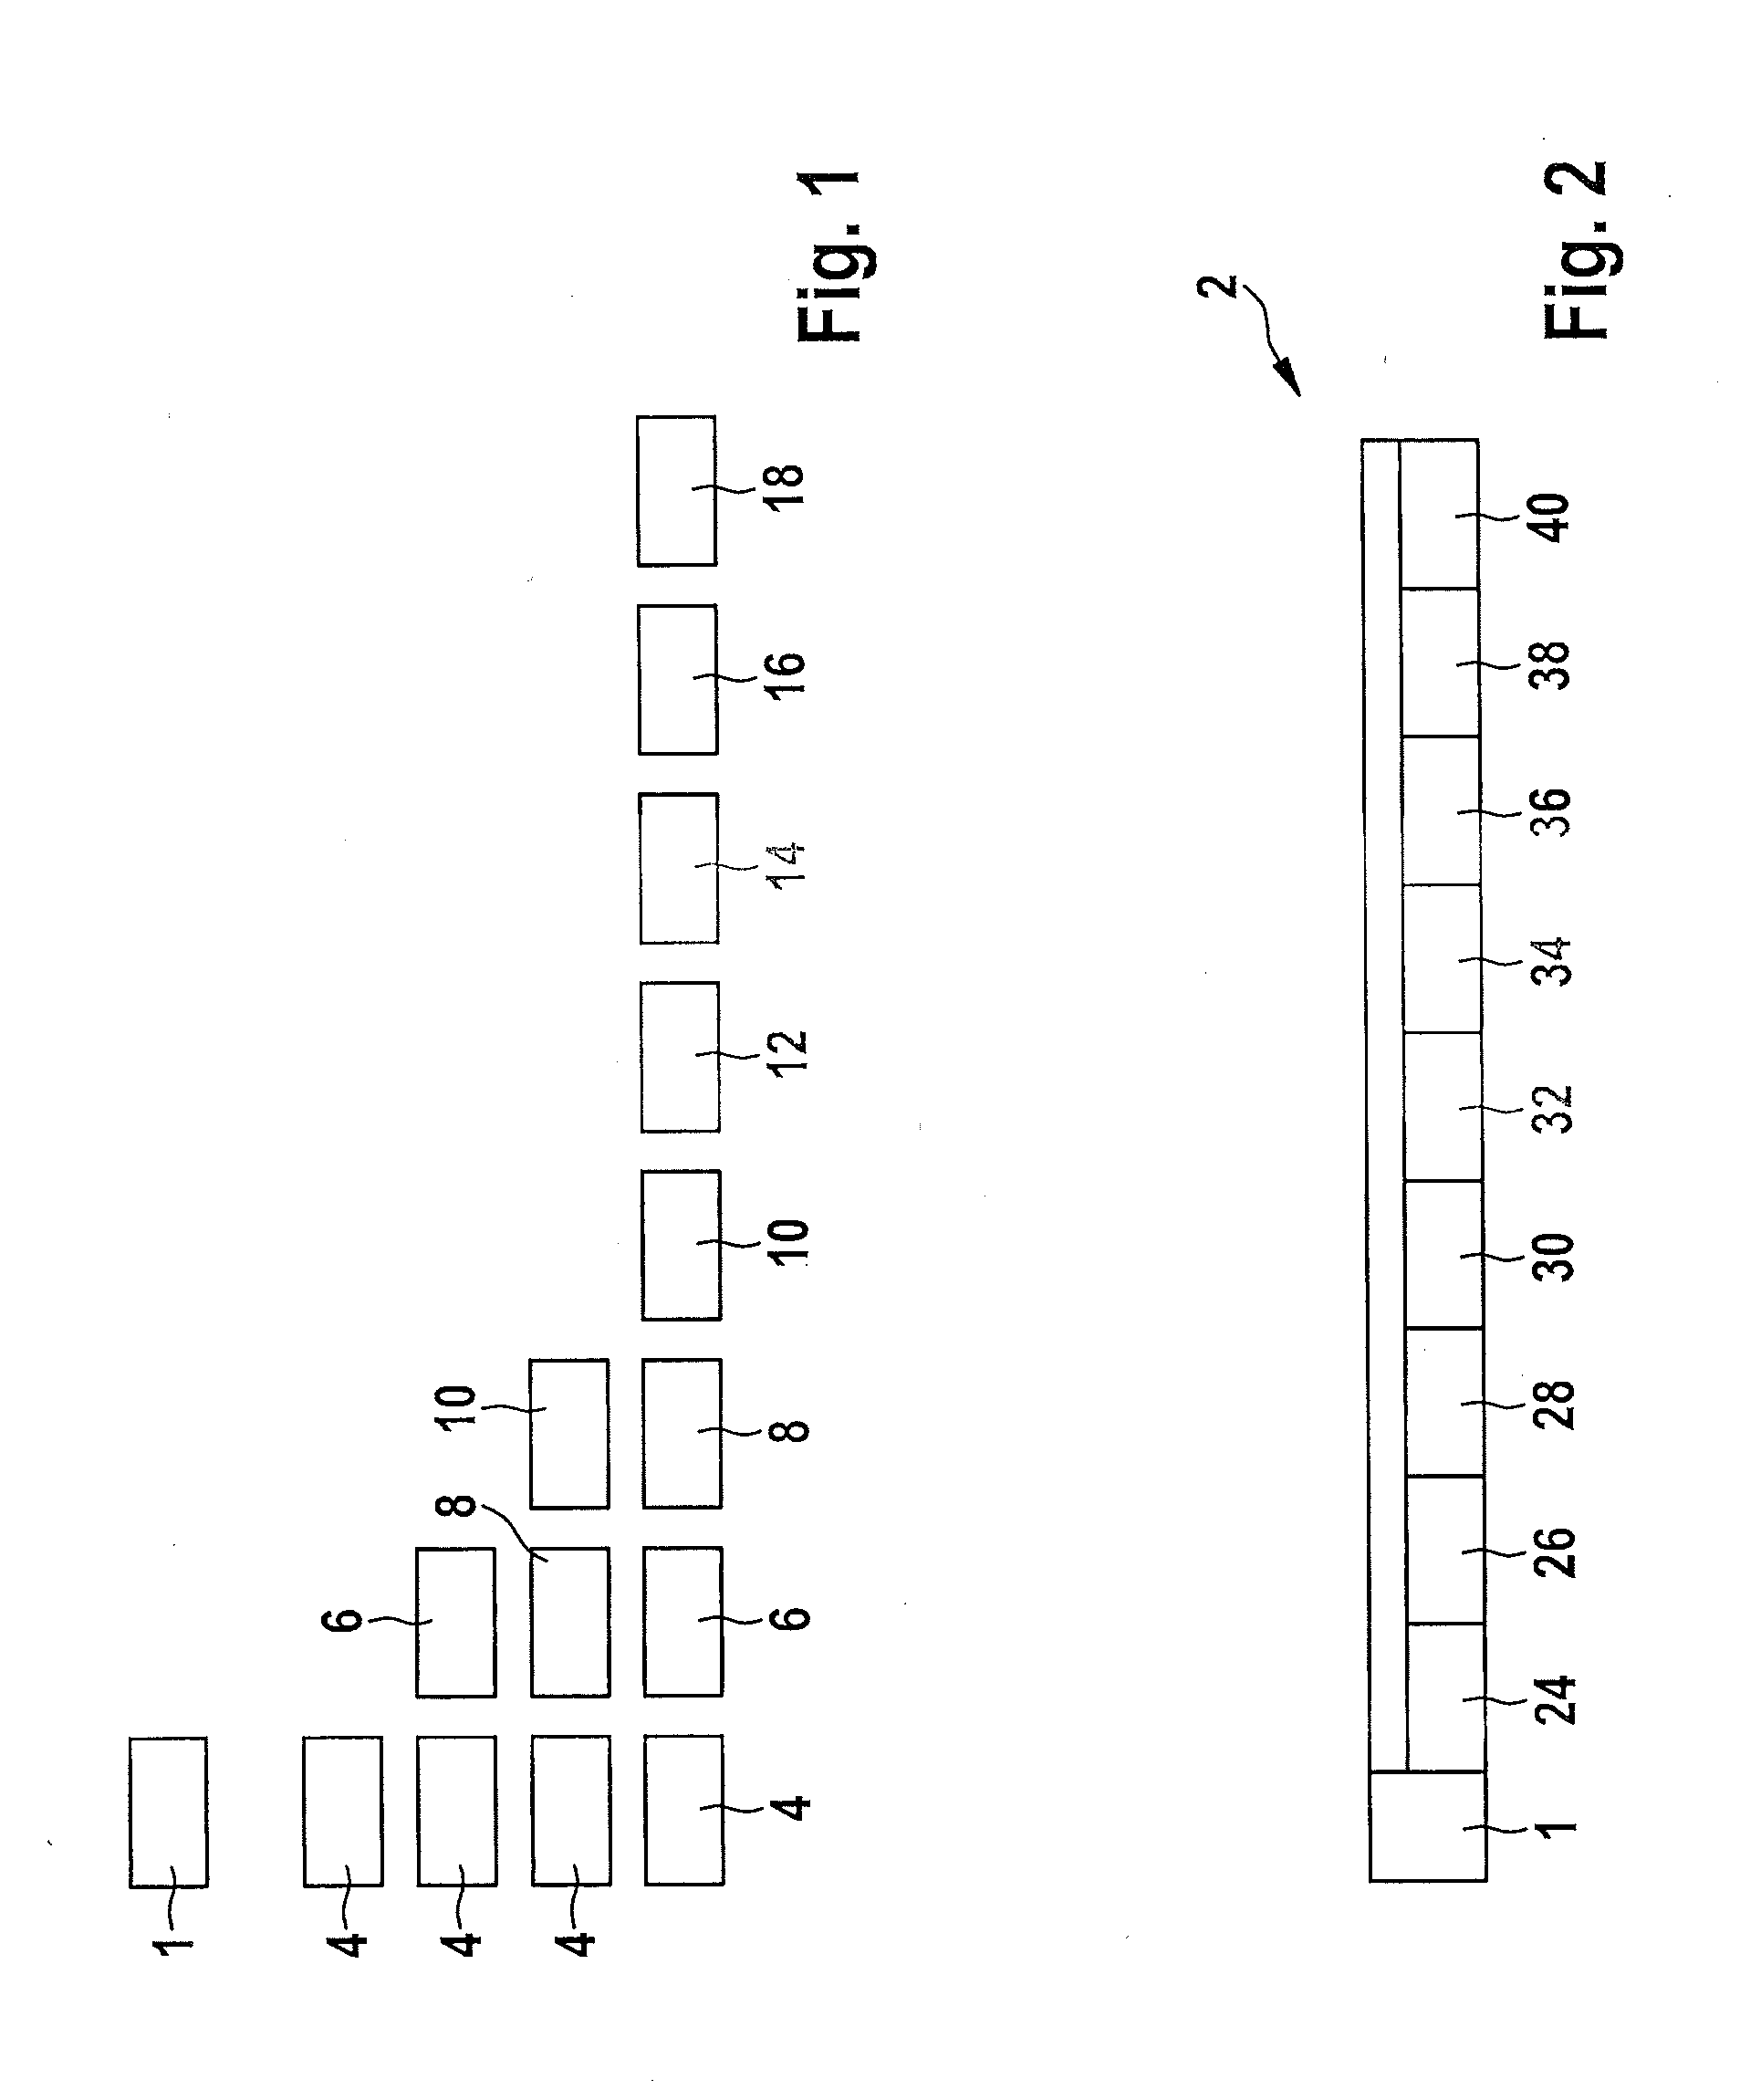 Method for operating a bus system